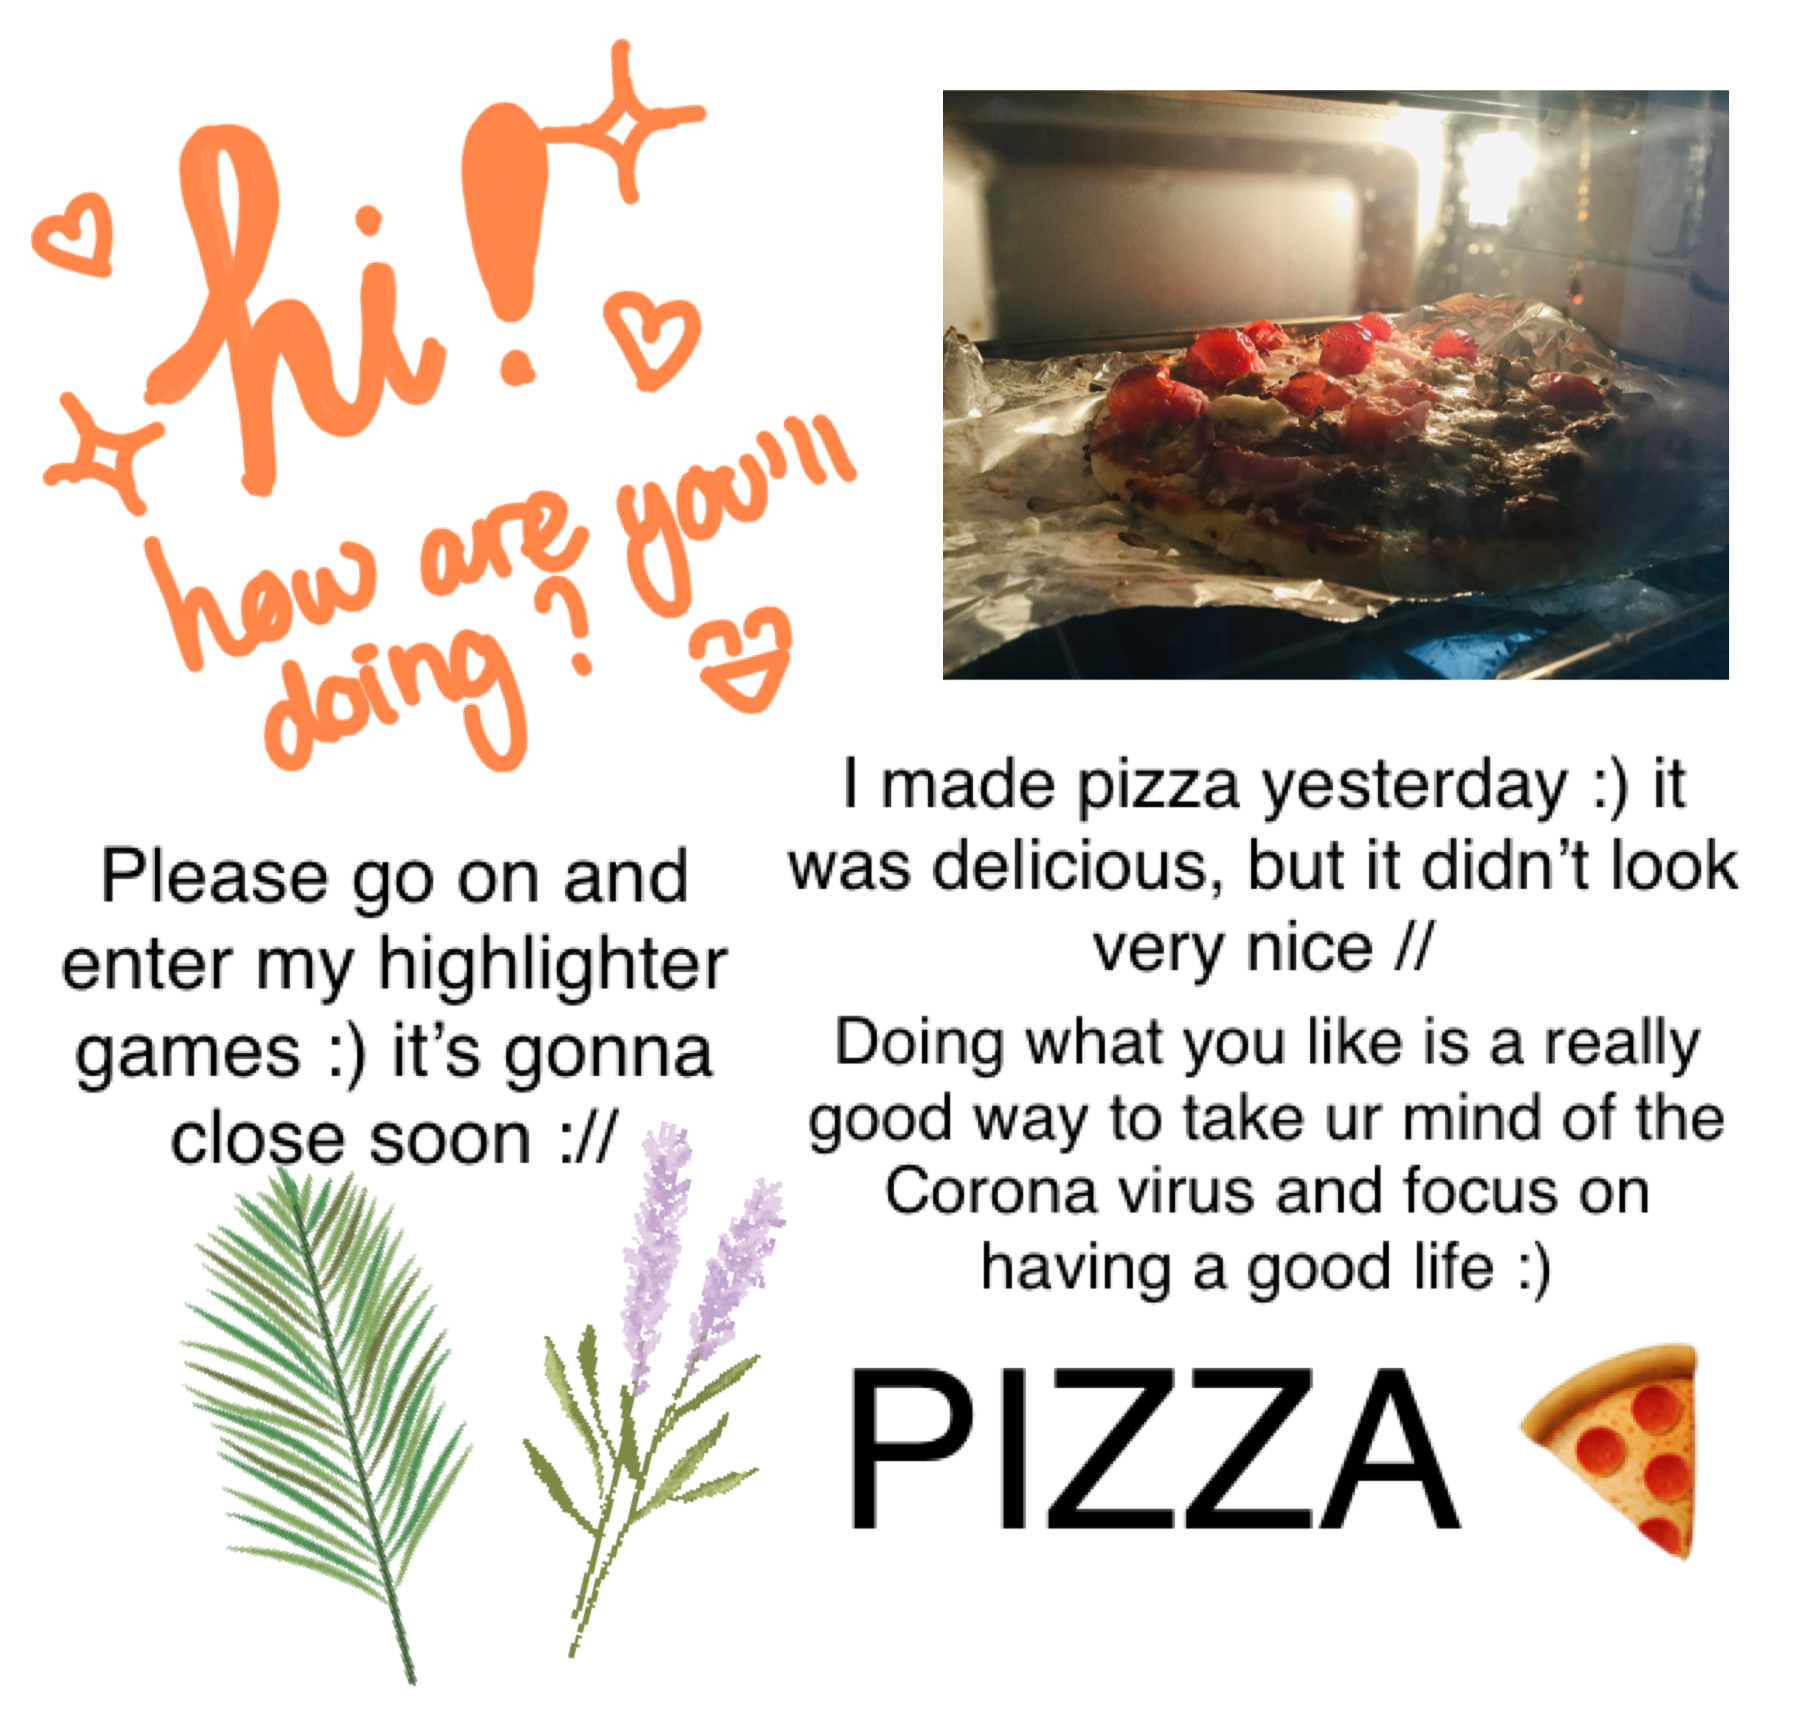 Yay! I luv pizza :) does any of u also like pizza? If u do, comment a 🤤🍕